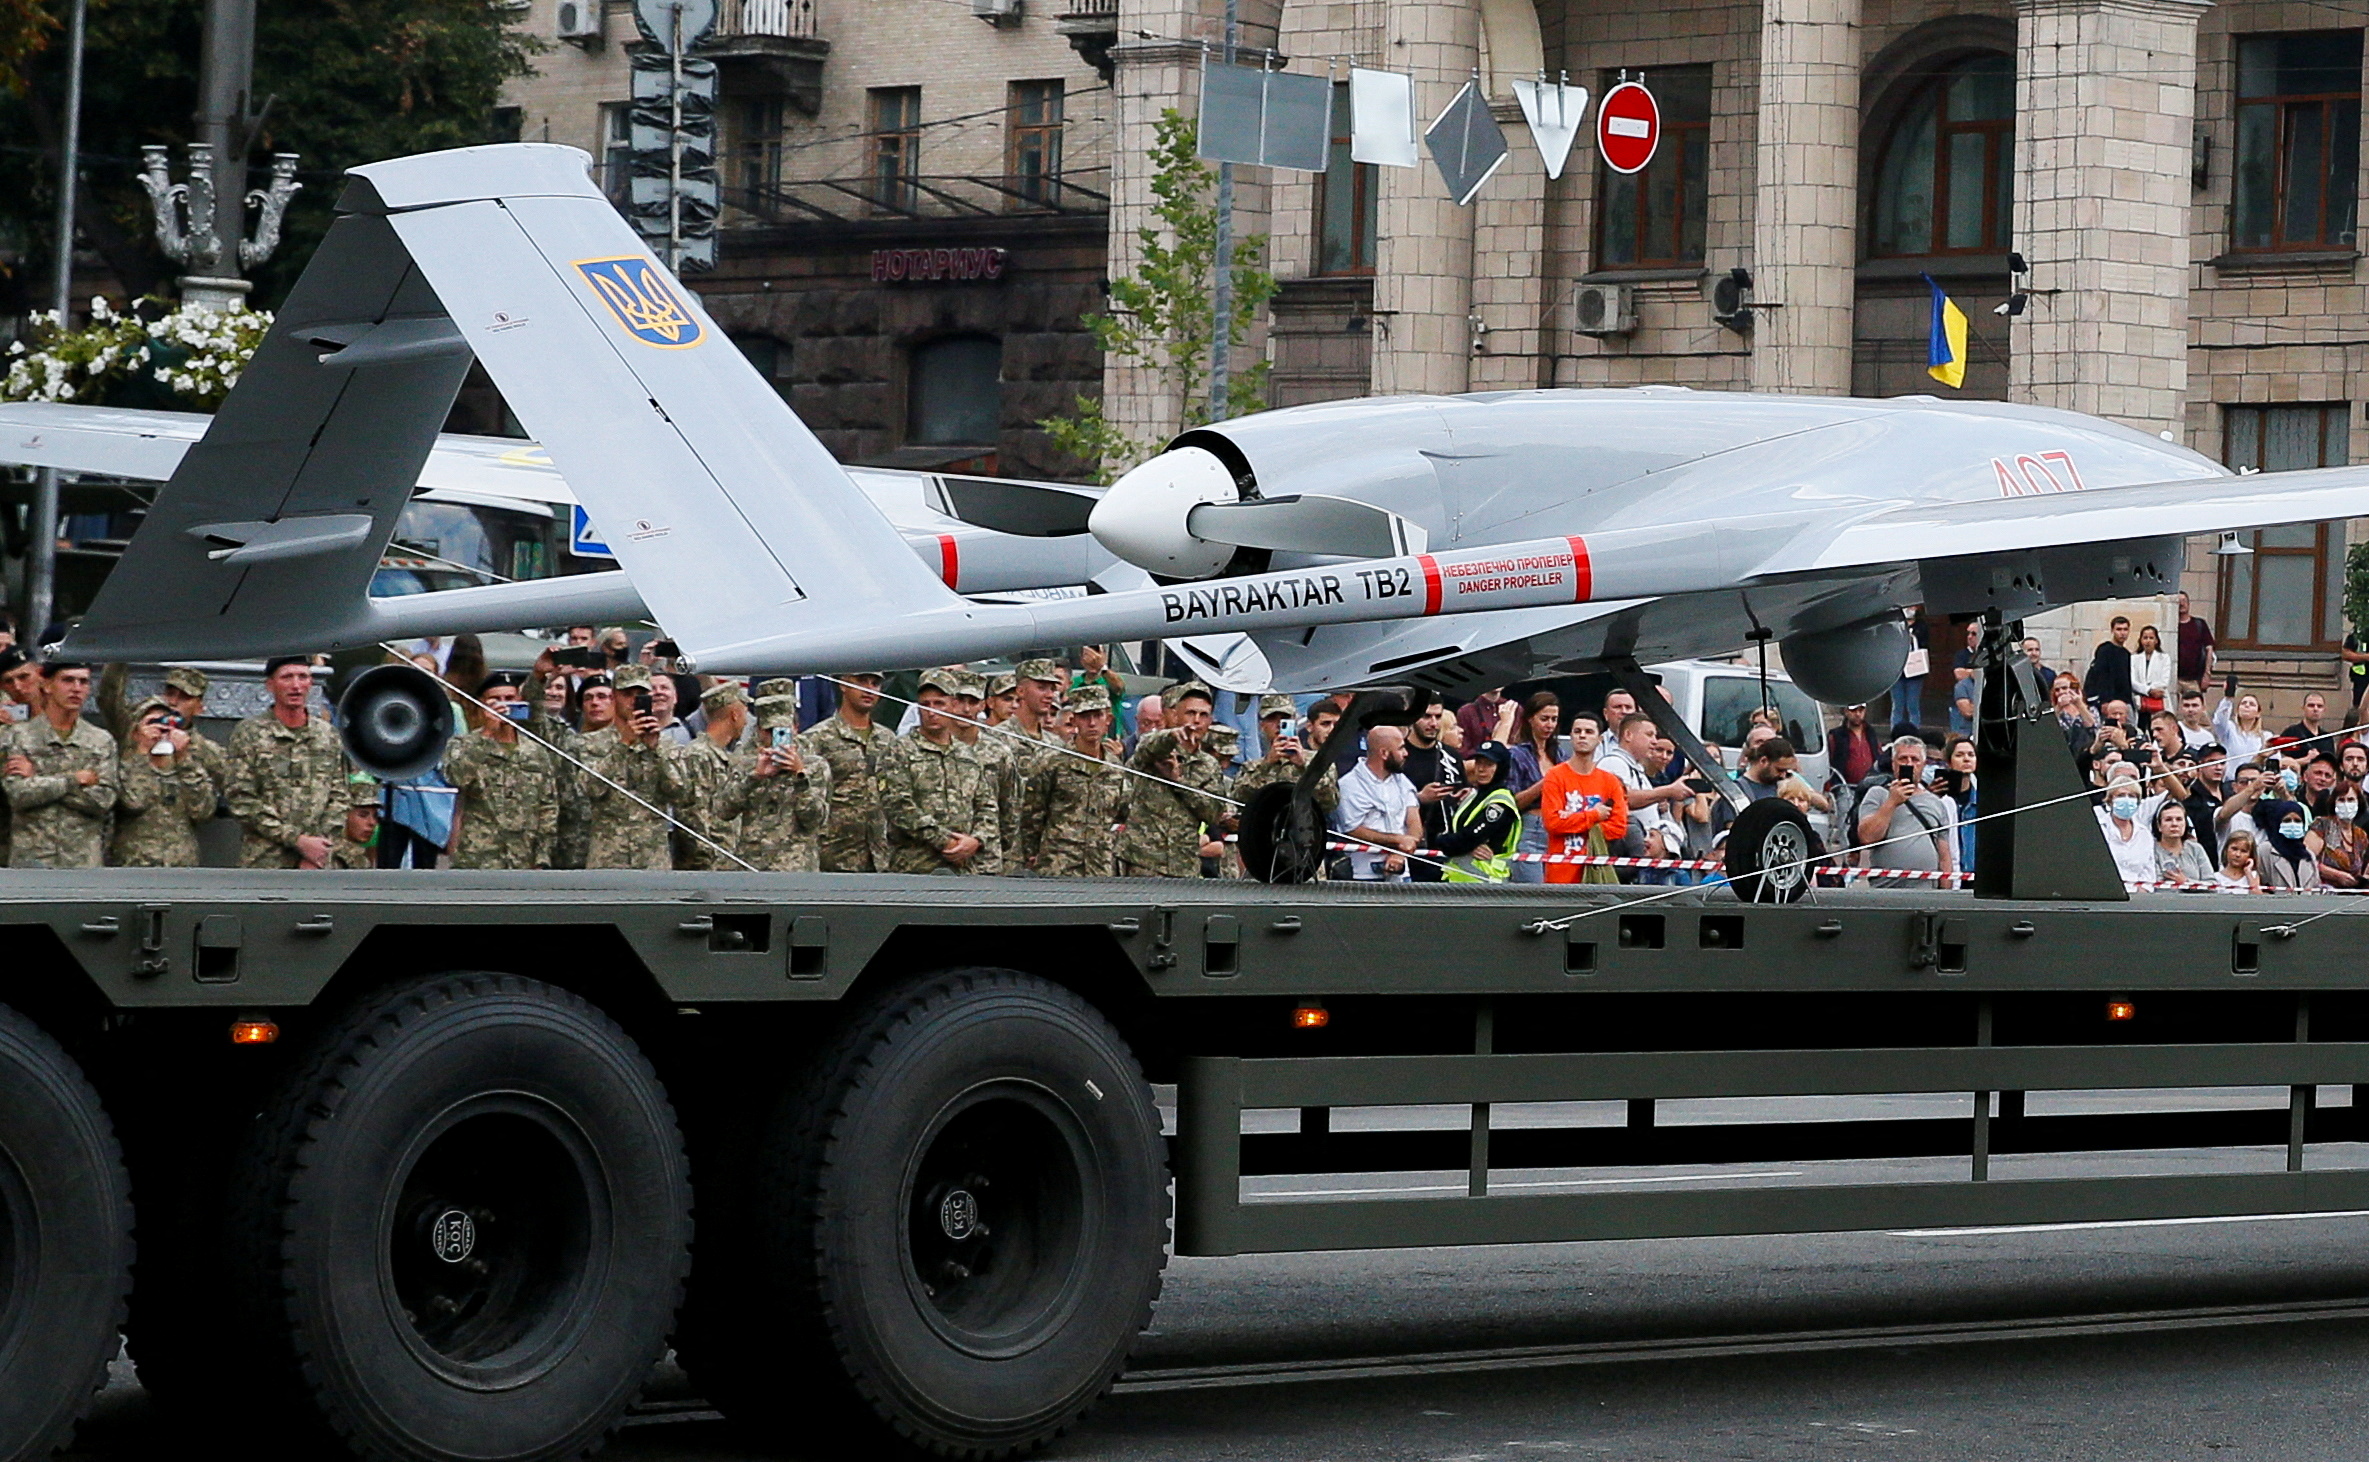 A Bayraktar drone seen during a rehearsal for the Independence Day military parade in central Kyiv, Ukraine August 18, 2021. REUTERS/Gleb Garanich